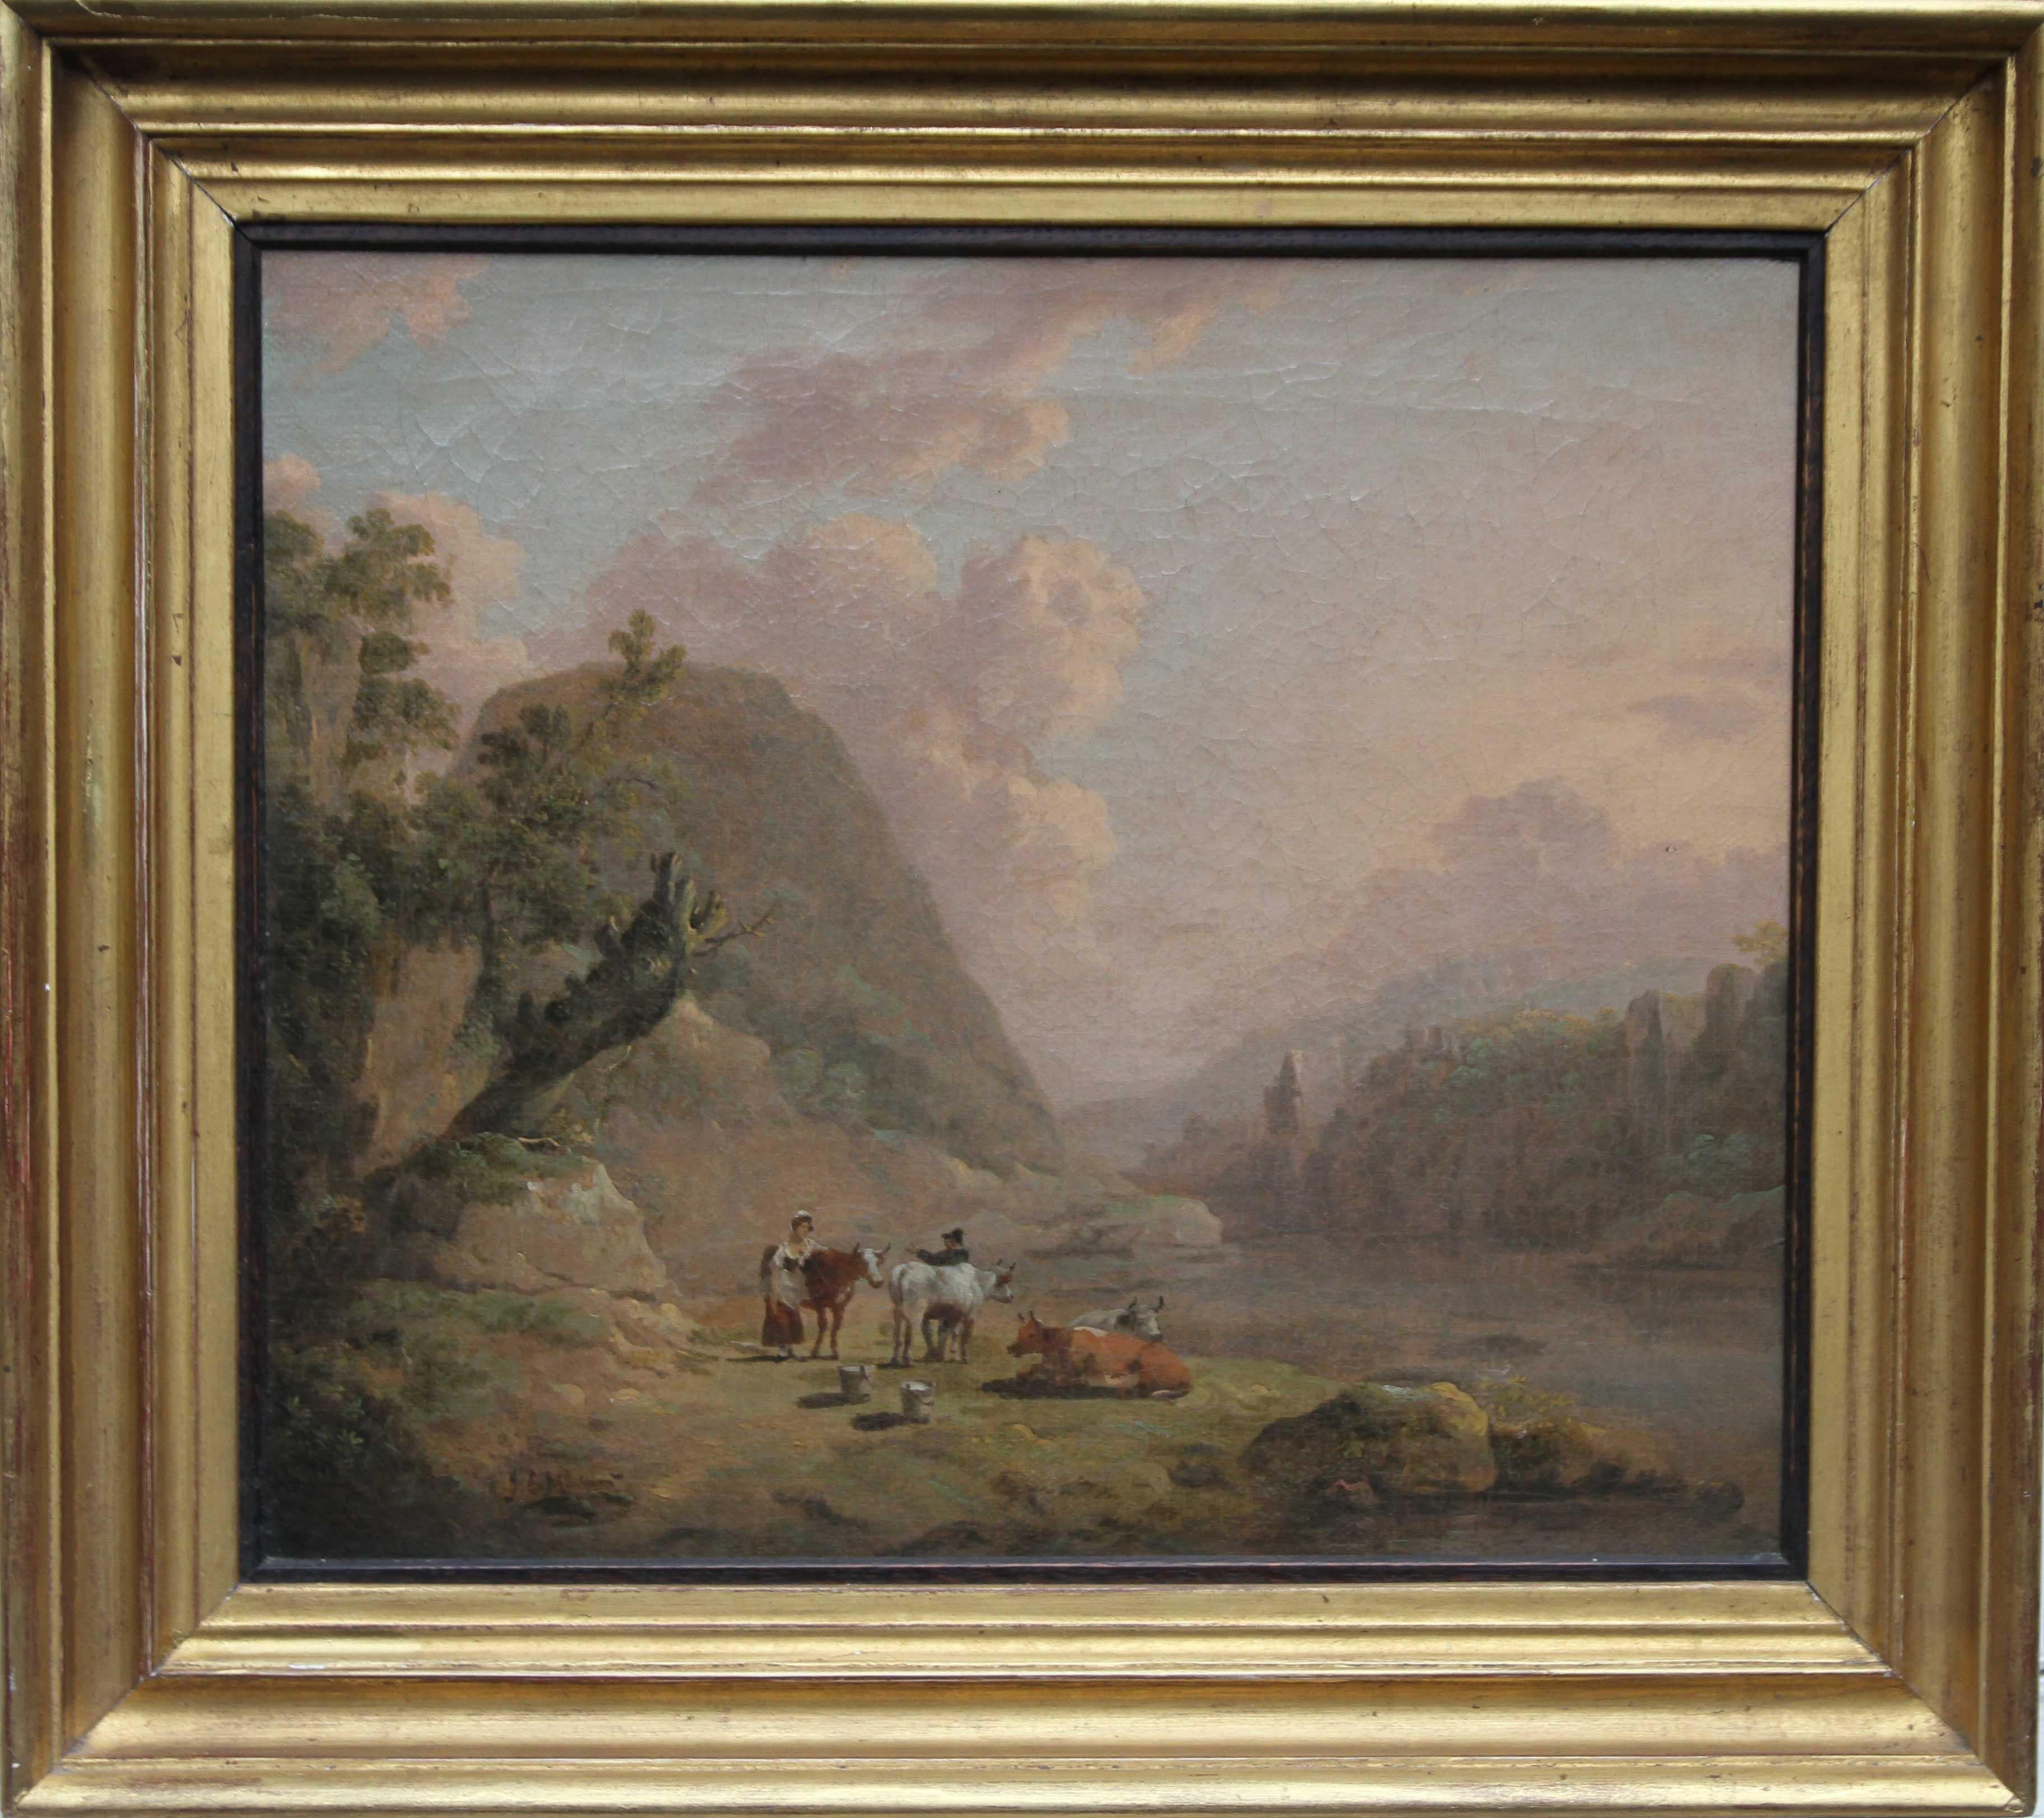 A fine delicate and sensitive oil on canvas which dates to circa 1790 by noted British landscape artist Julius Caesar Ibbetson. A stunning panoramic view, it depicts cattle resting in an open landscape by a stream A fine large example of his work.